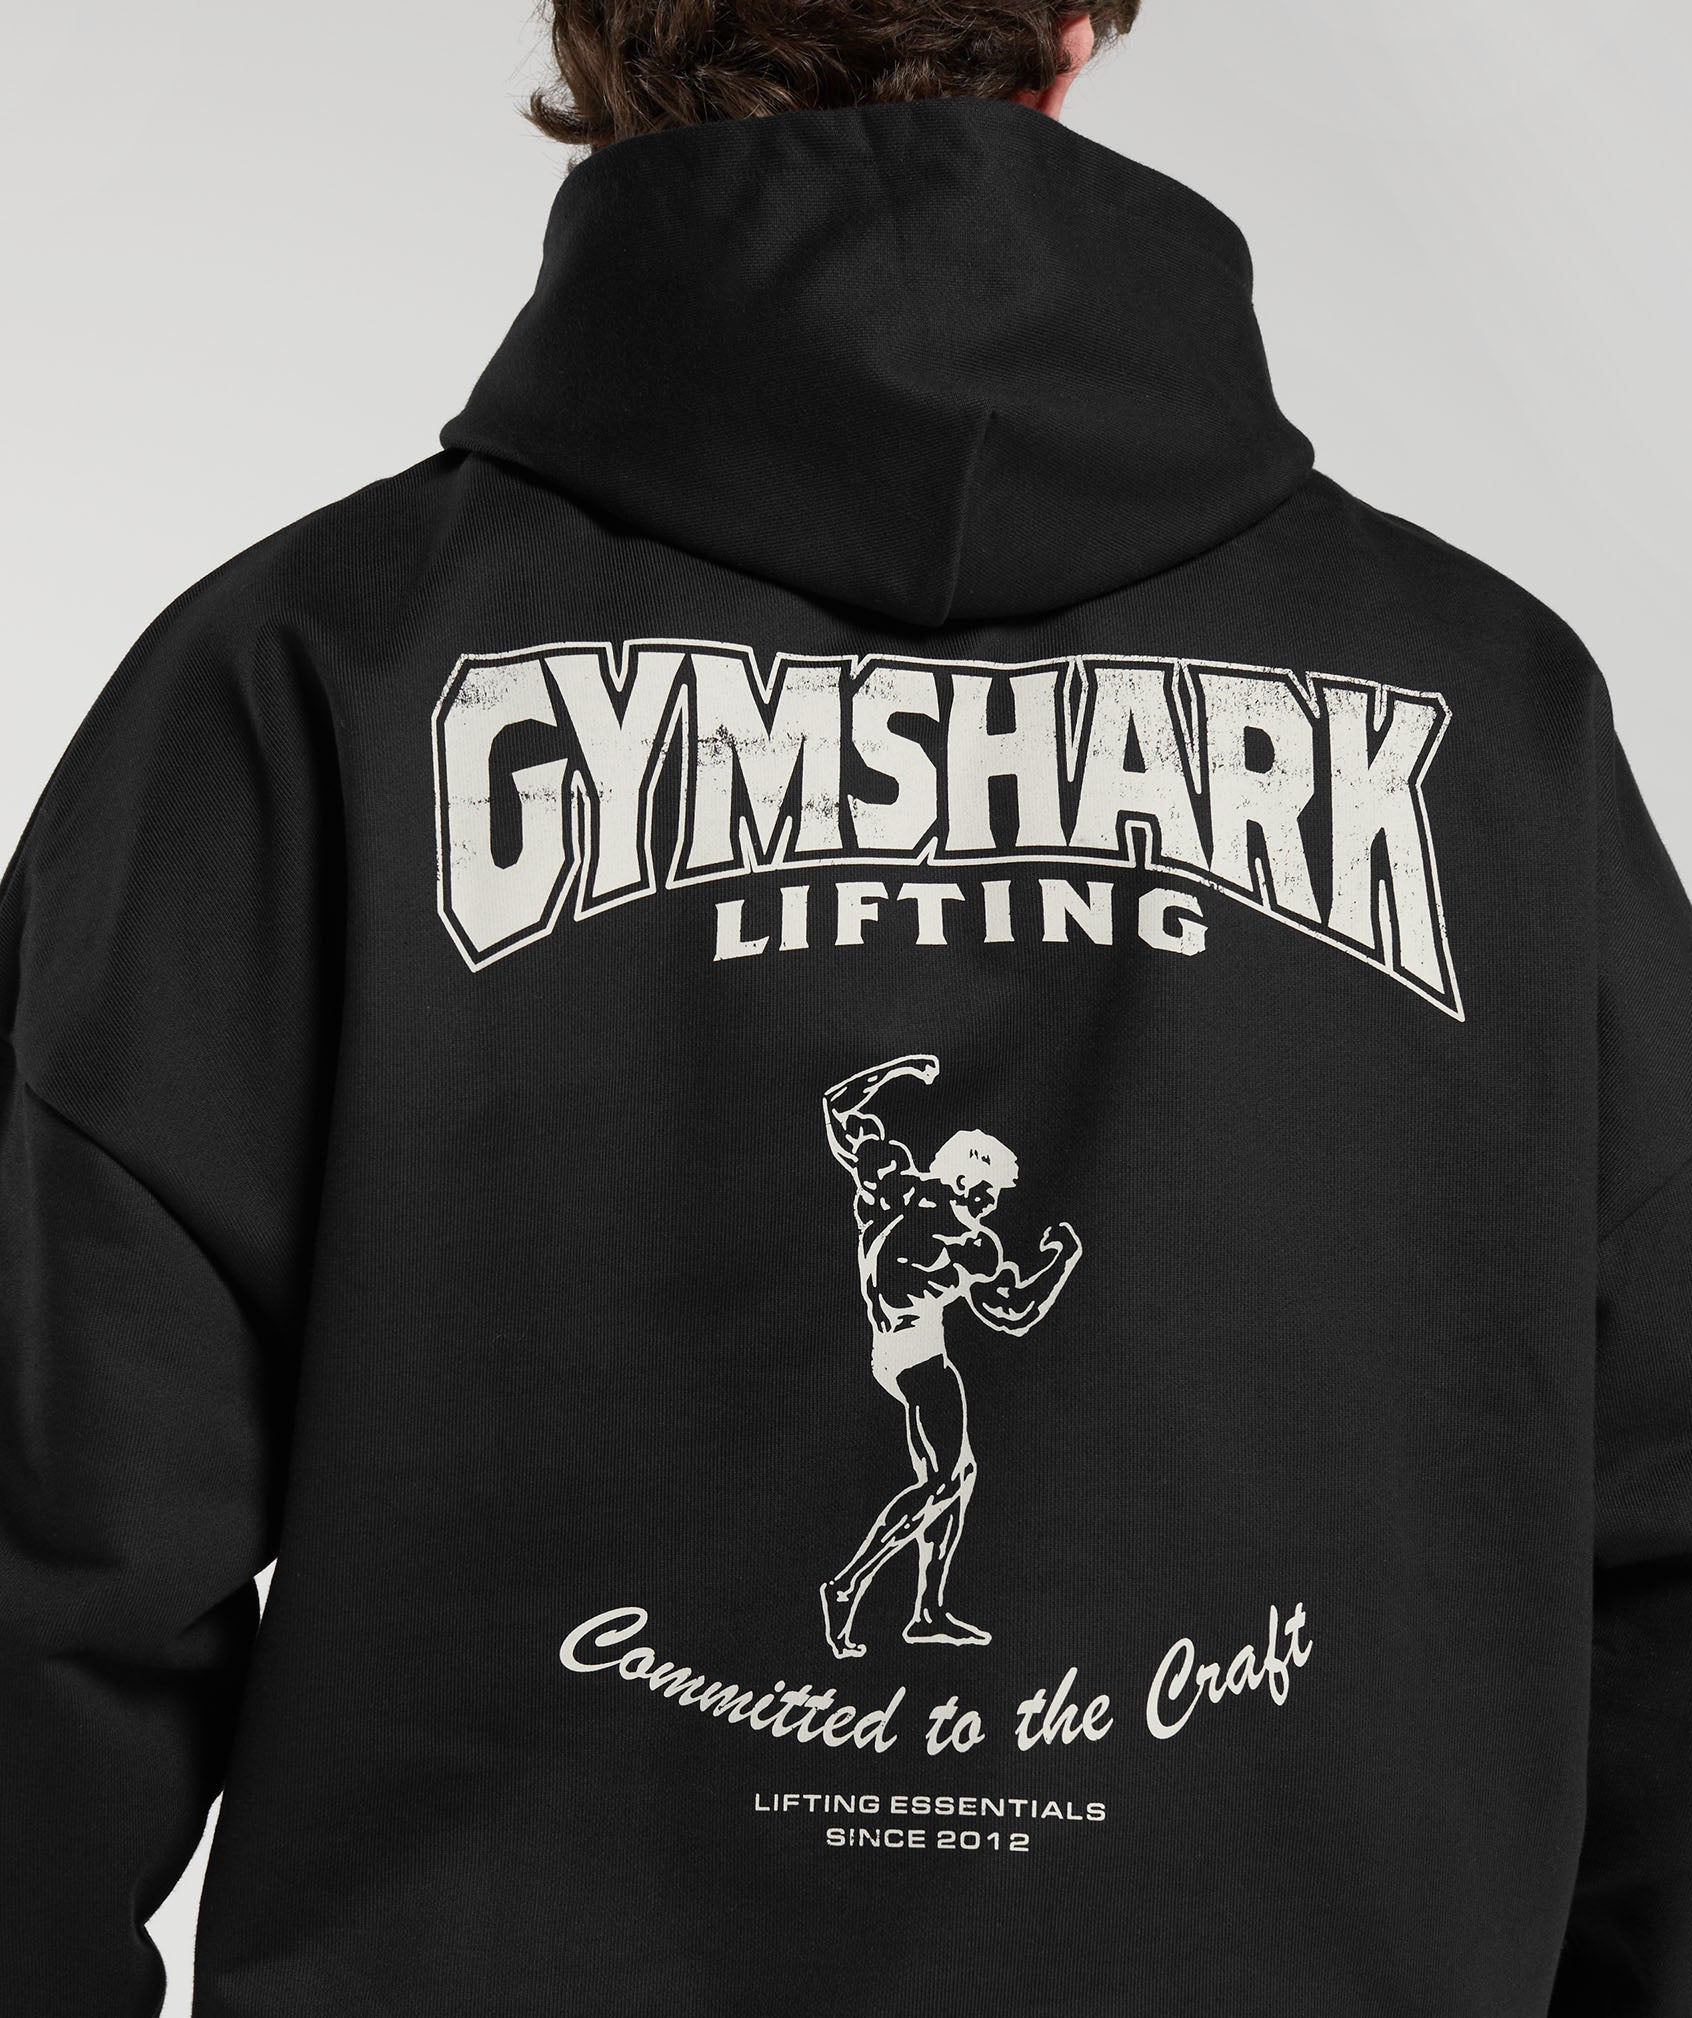 Committed to the Craft Hoodie in Black - view 7